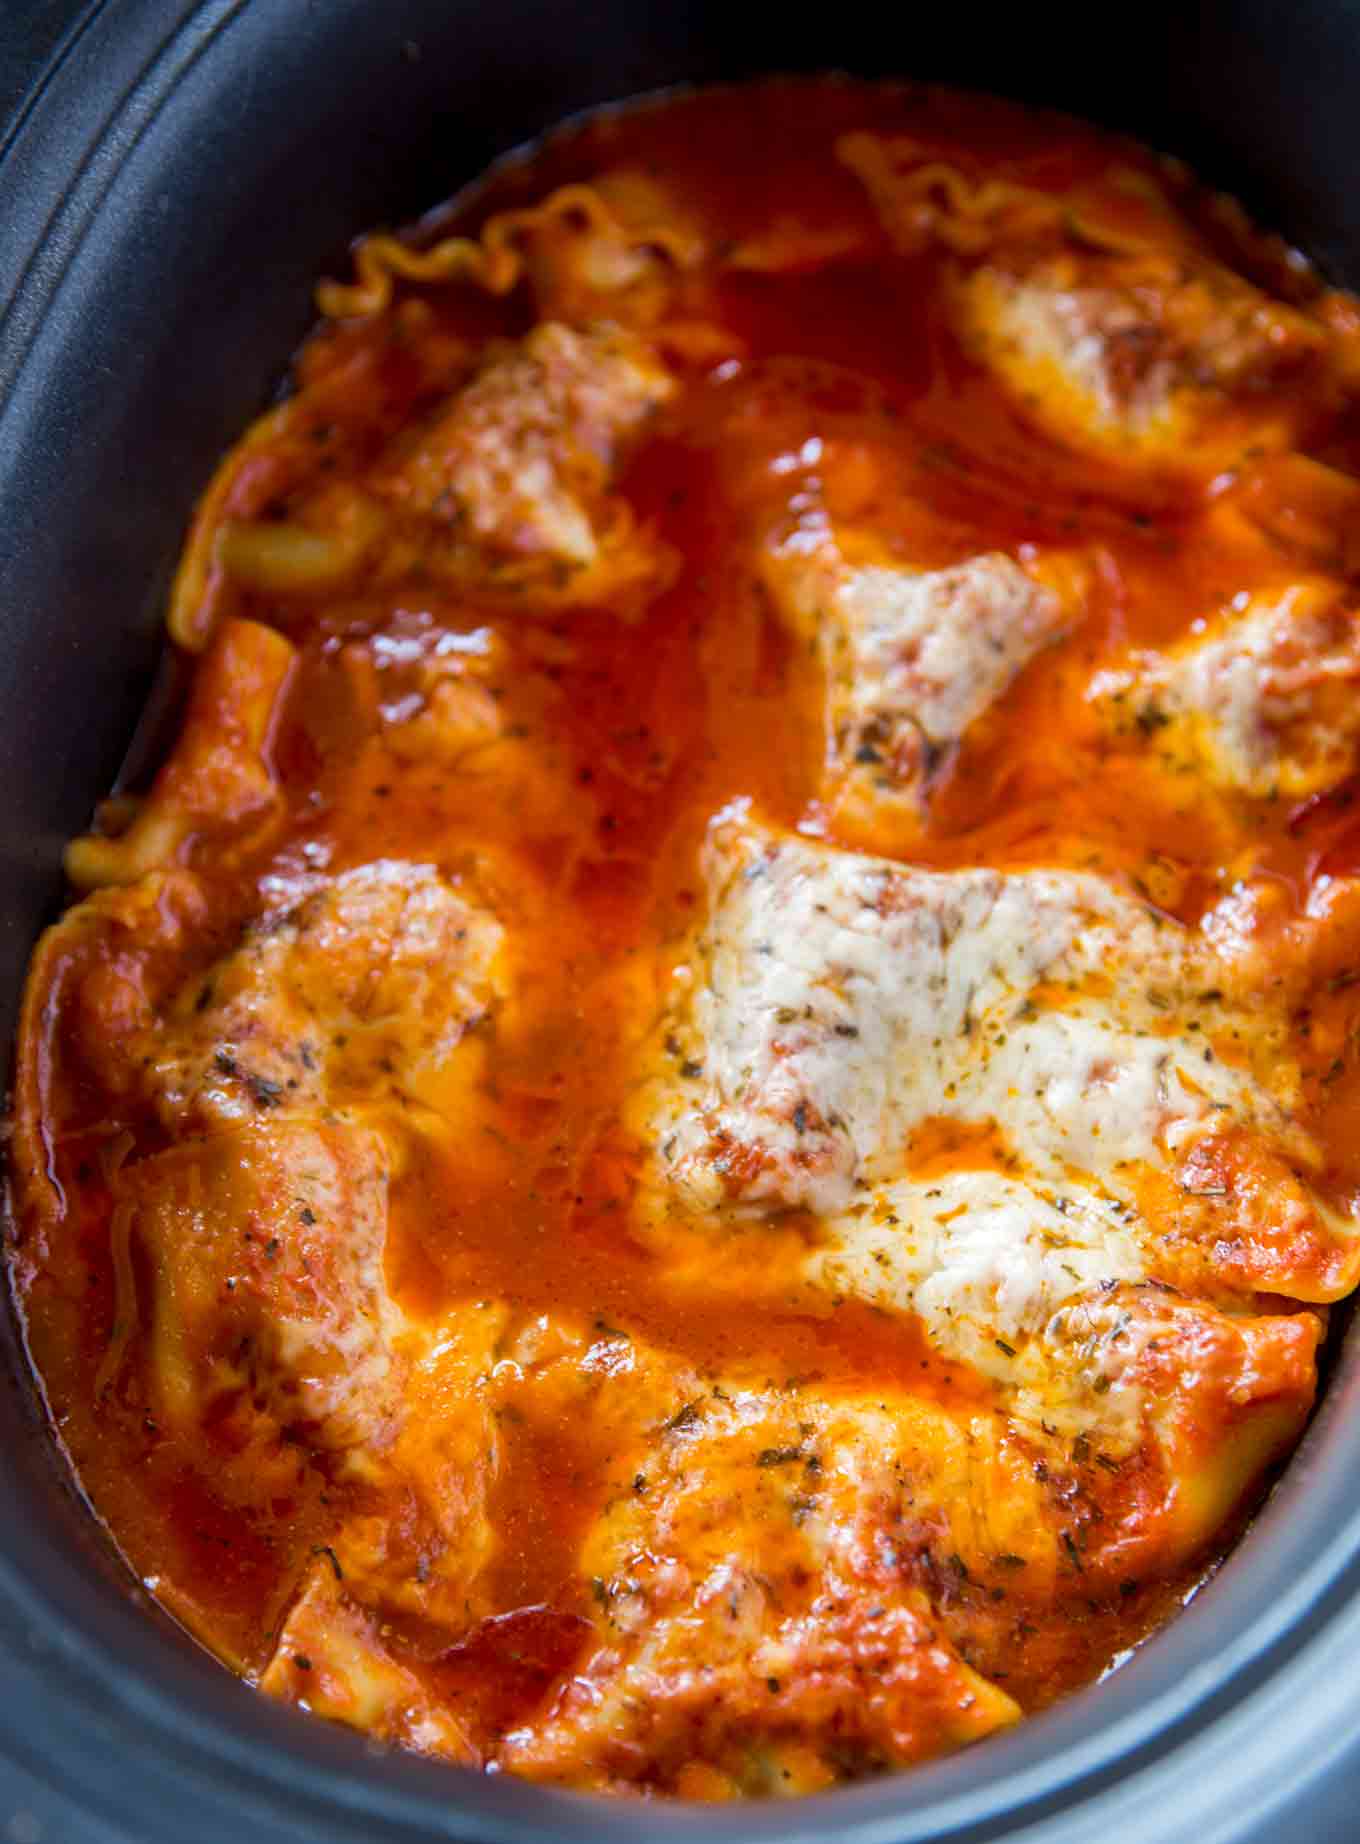 Slow Cooker Lasagna made with lasagna noodles, beef, mozzarella, ricotta and Parmesan cheese is the ultimate comfort food in just 20 minutes of prep time.